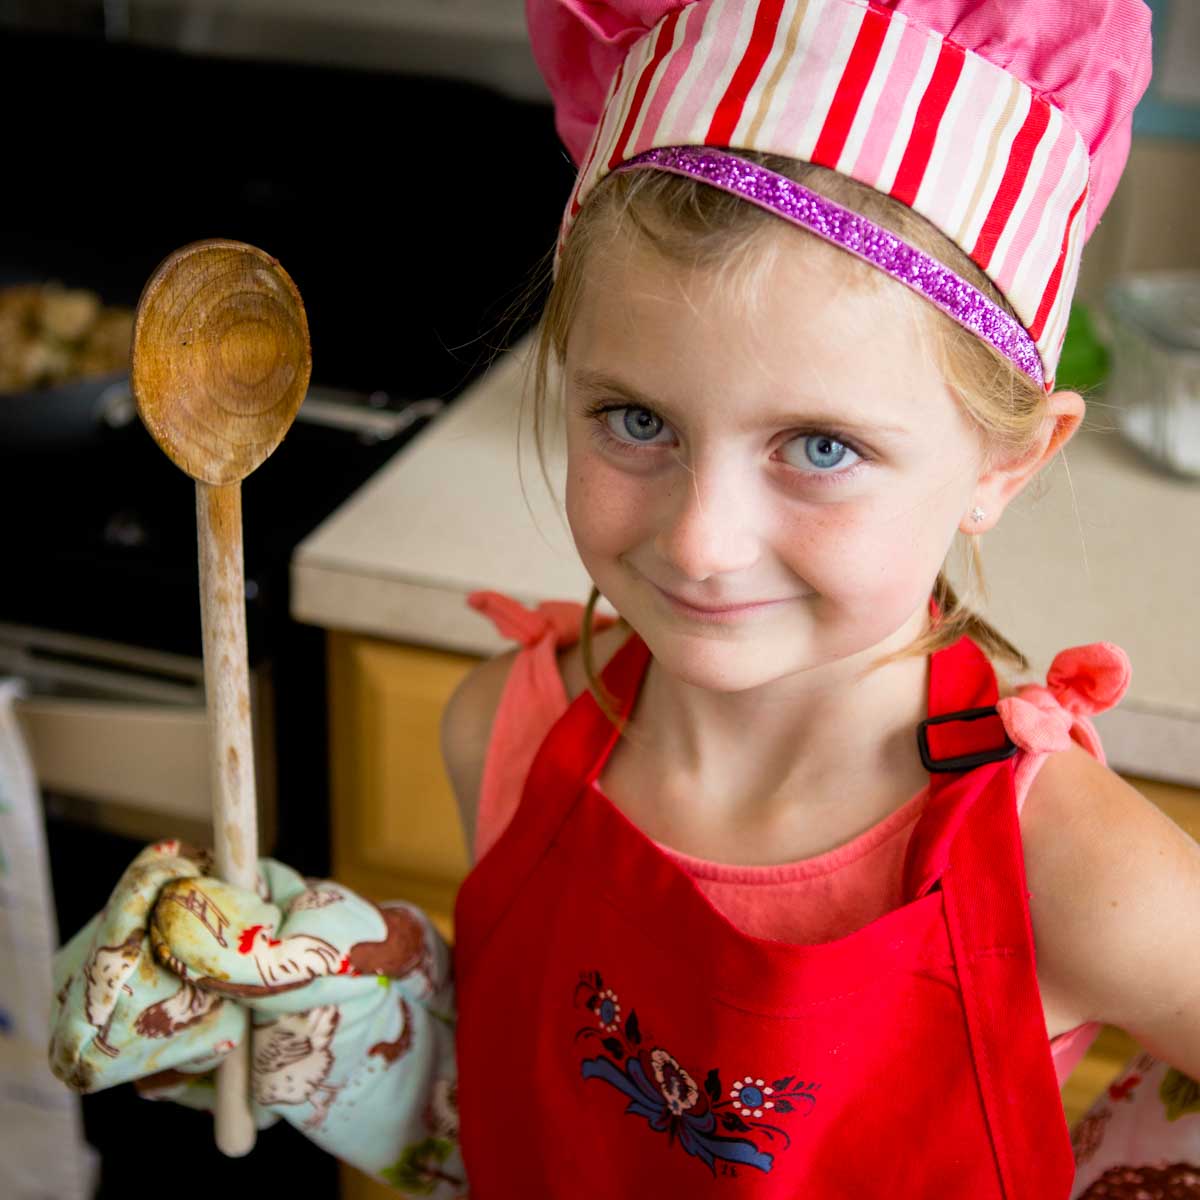 A young girl has an apron, oven mitt, cooking spoon, and chef hat.